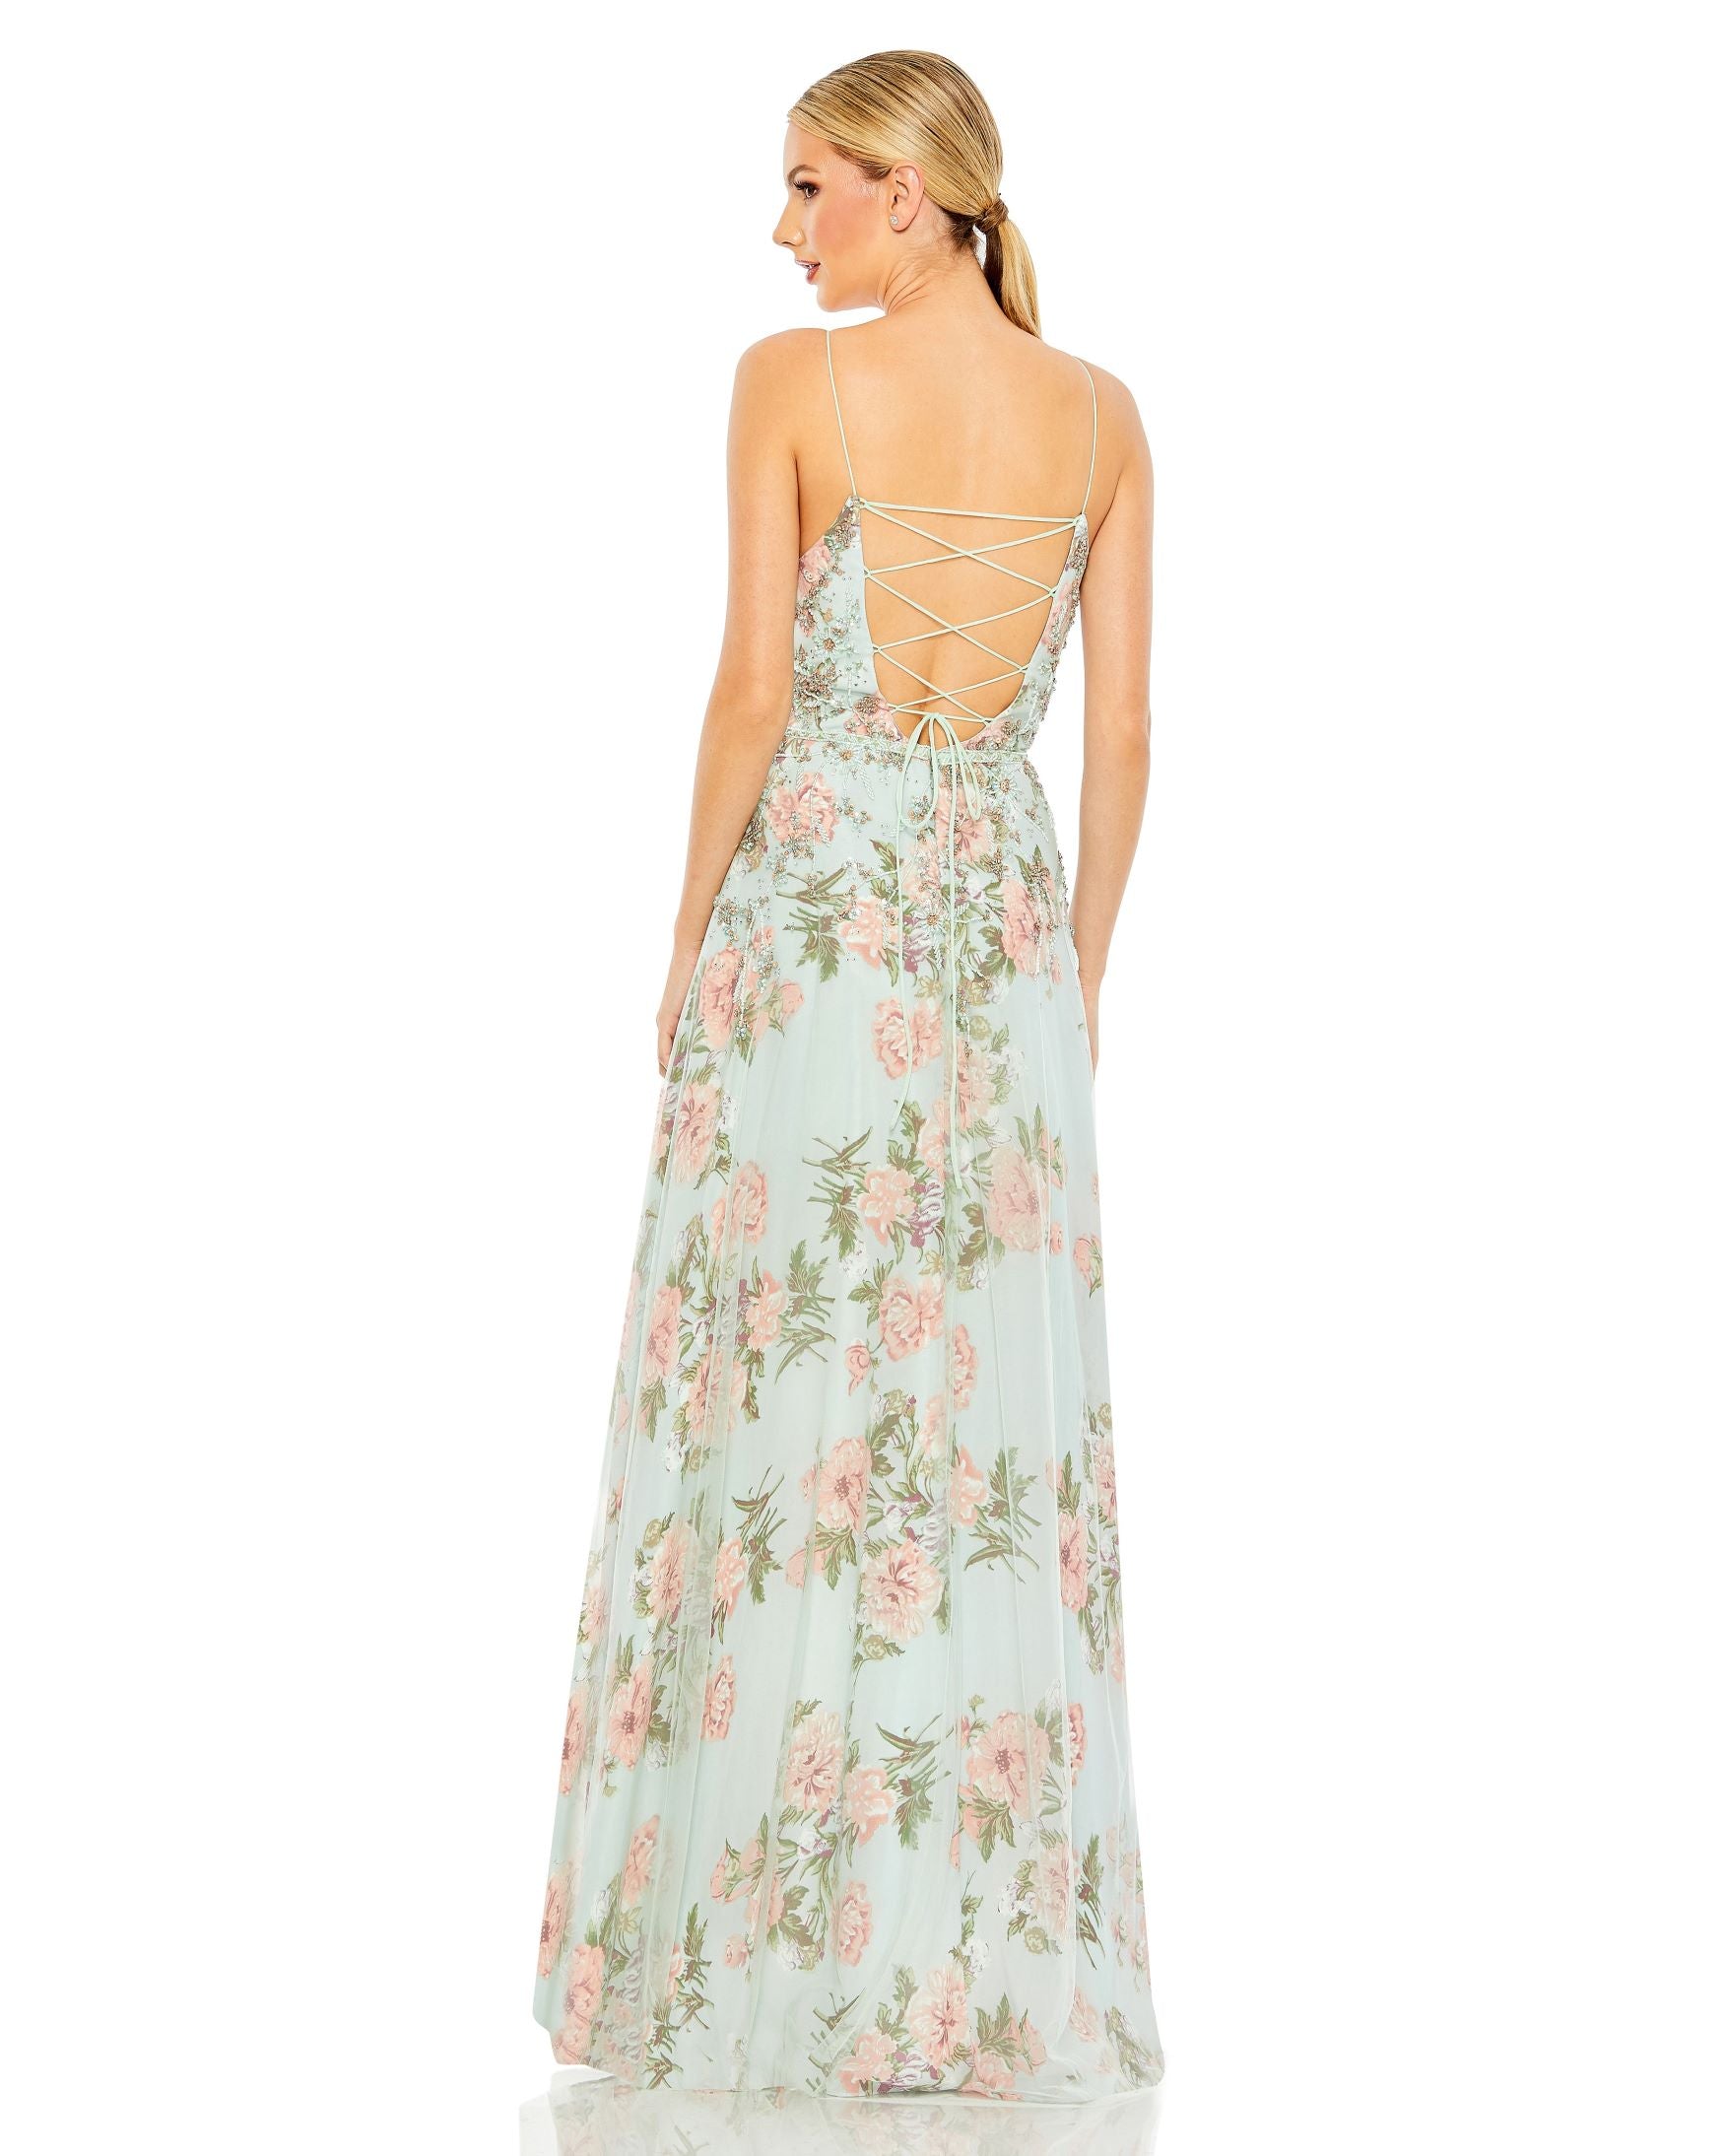 Embellished Lace Up Sleeveless Gown - FINAL SALE